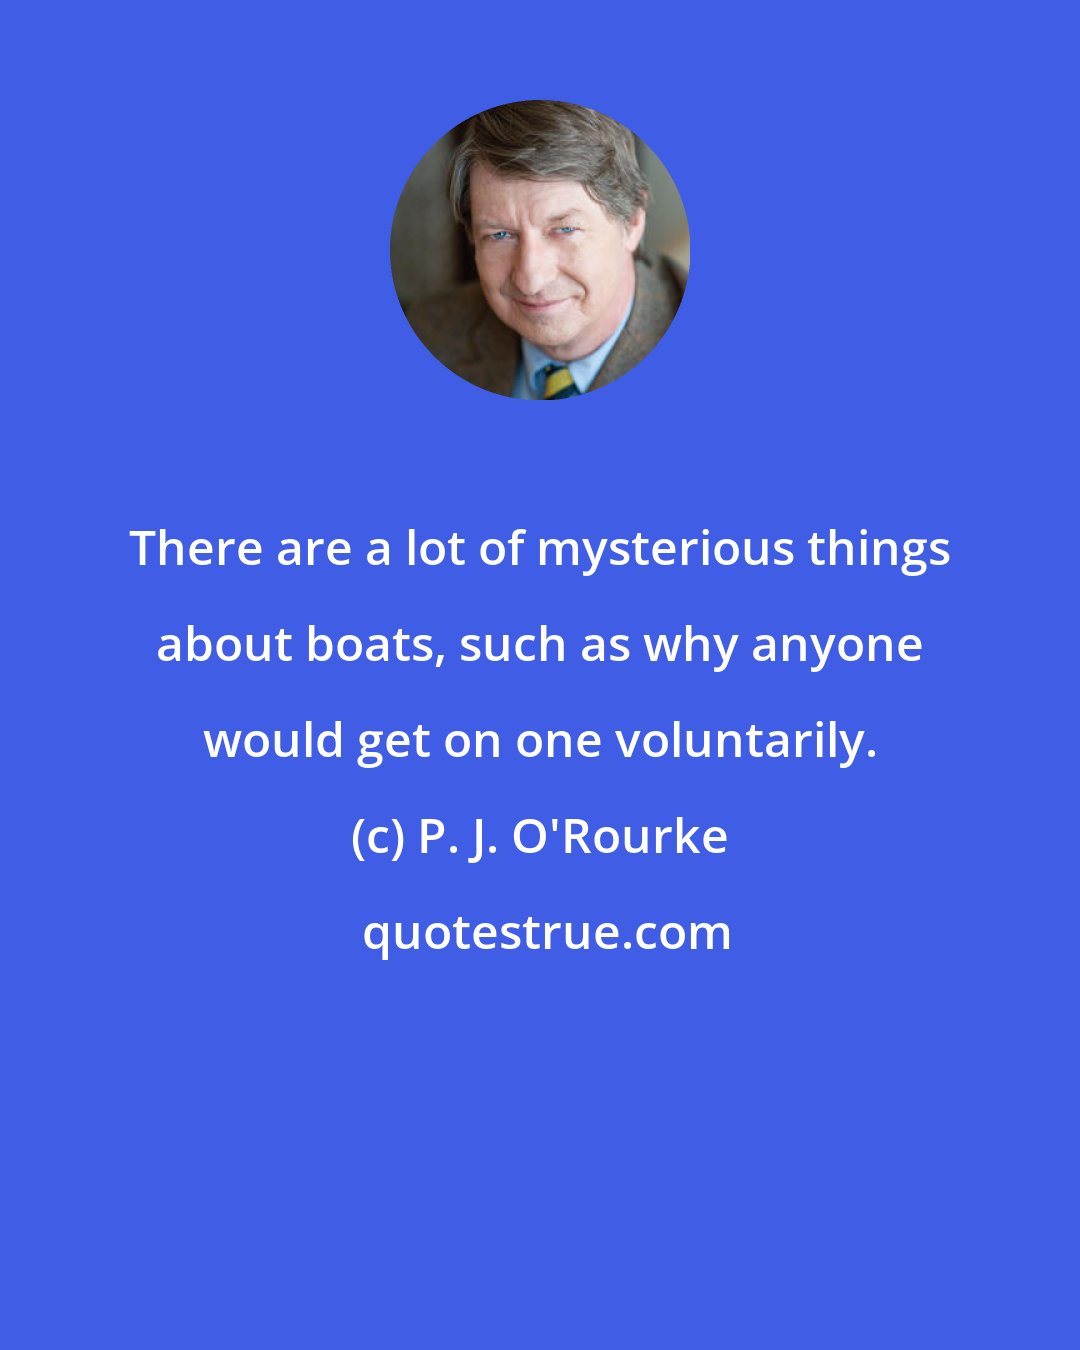 P. J. O'Rourke: There are a lot of mysterious things about boats, such as why anyone would get on one voluntarily.